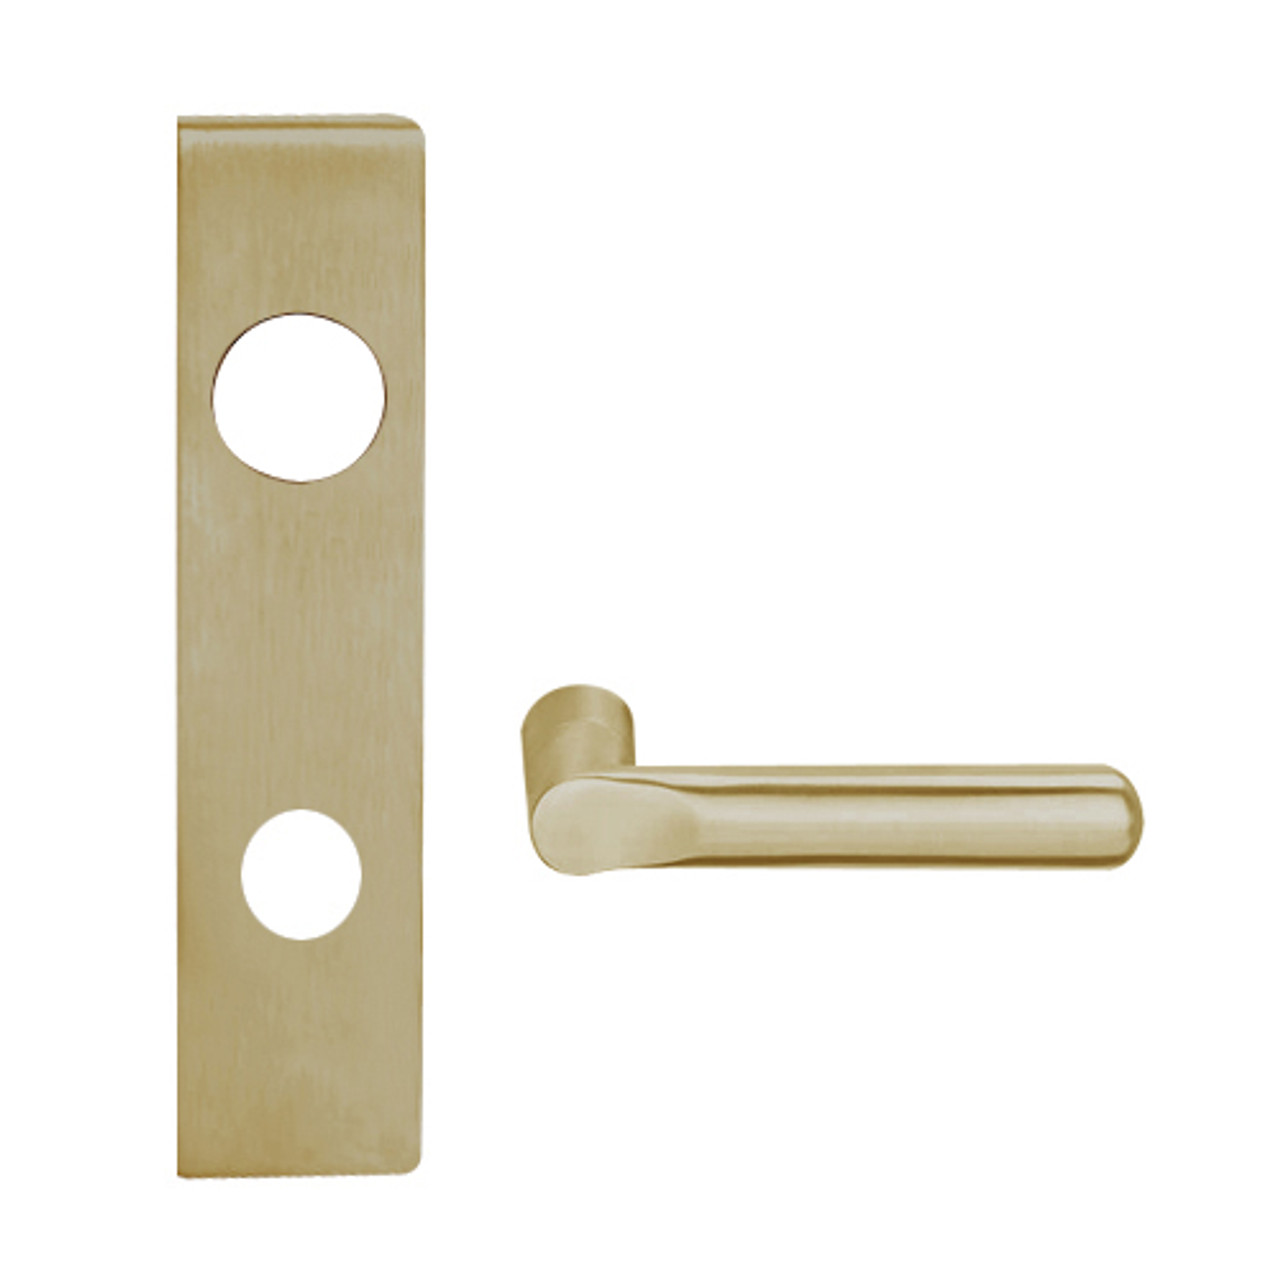 L9050R-18L-613 Schlage L Series Entrance Commercial Mortise Lock with 18 Cast Lever Design and Full Size Core in Oil Rubbed Bronze